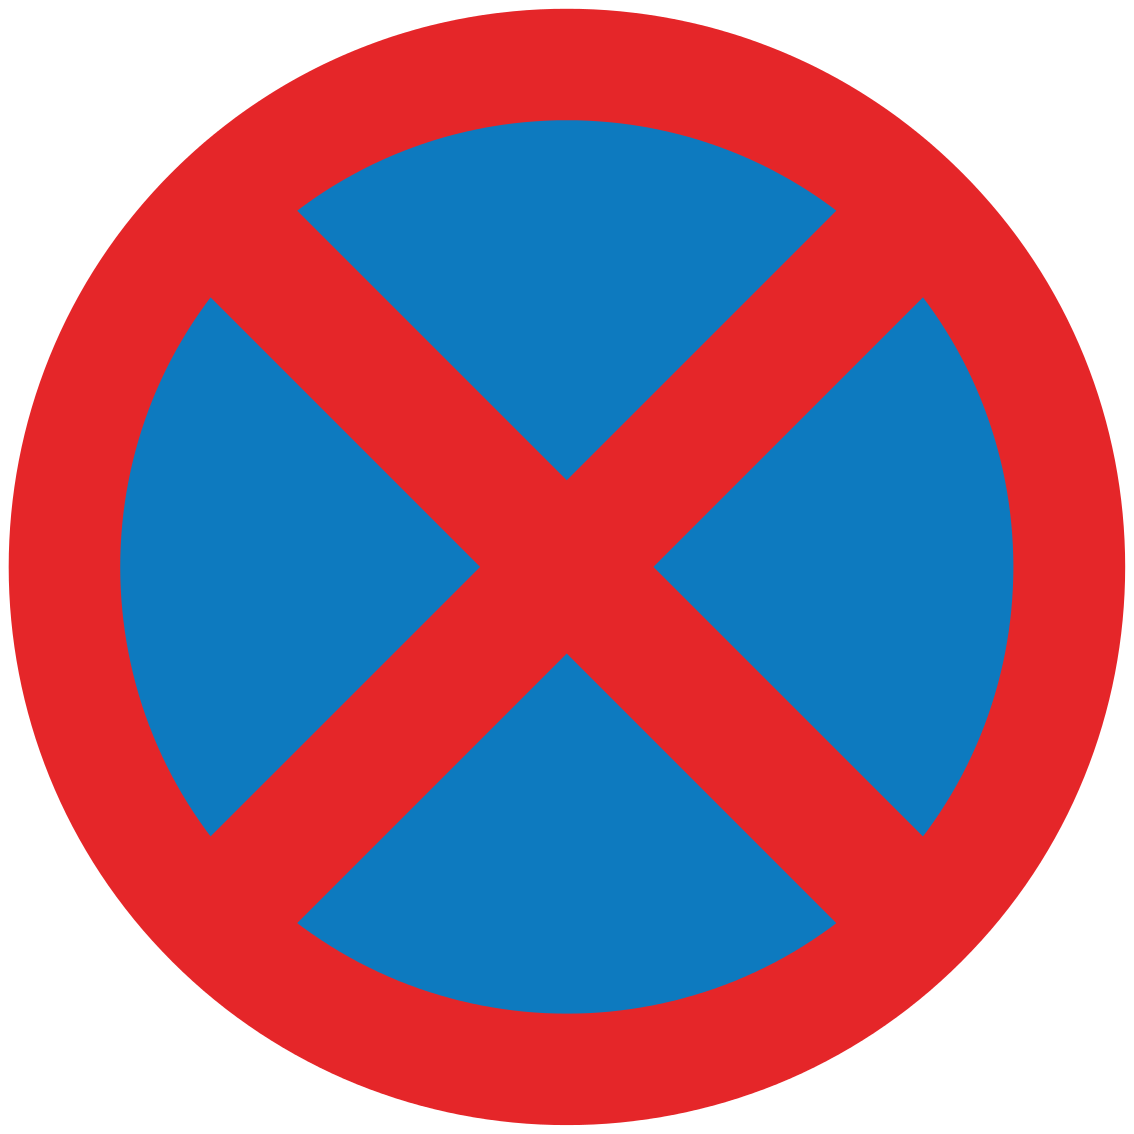 No stopping on side of road where sign is displayed